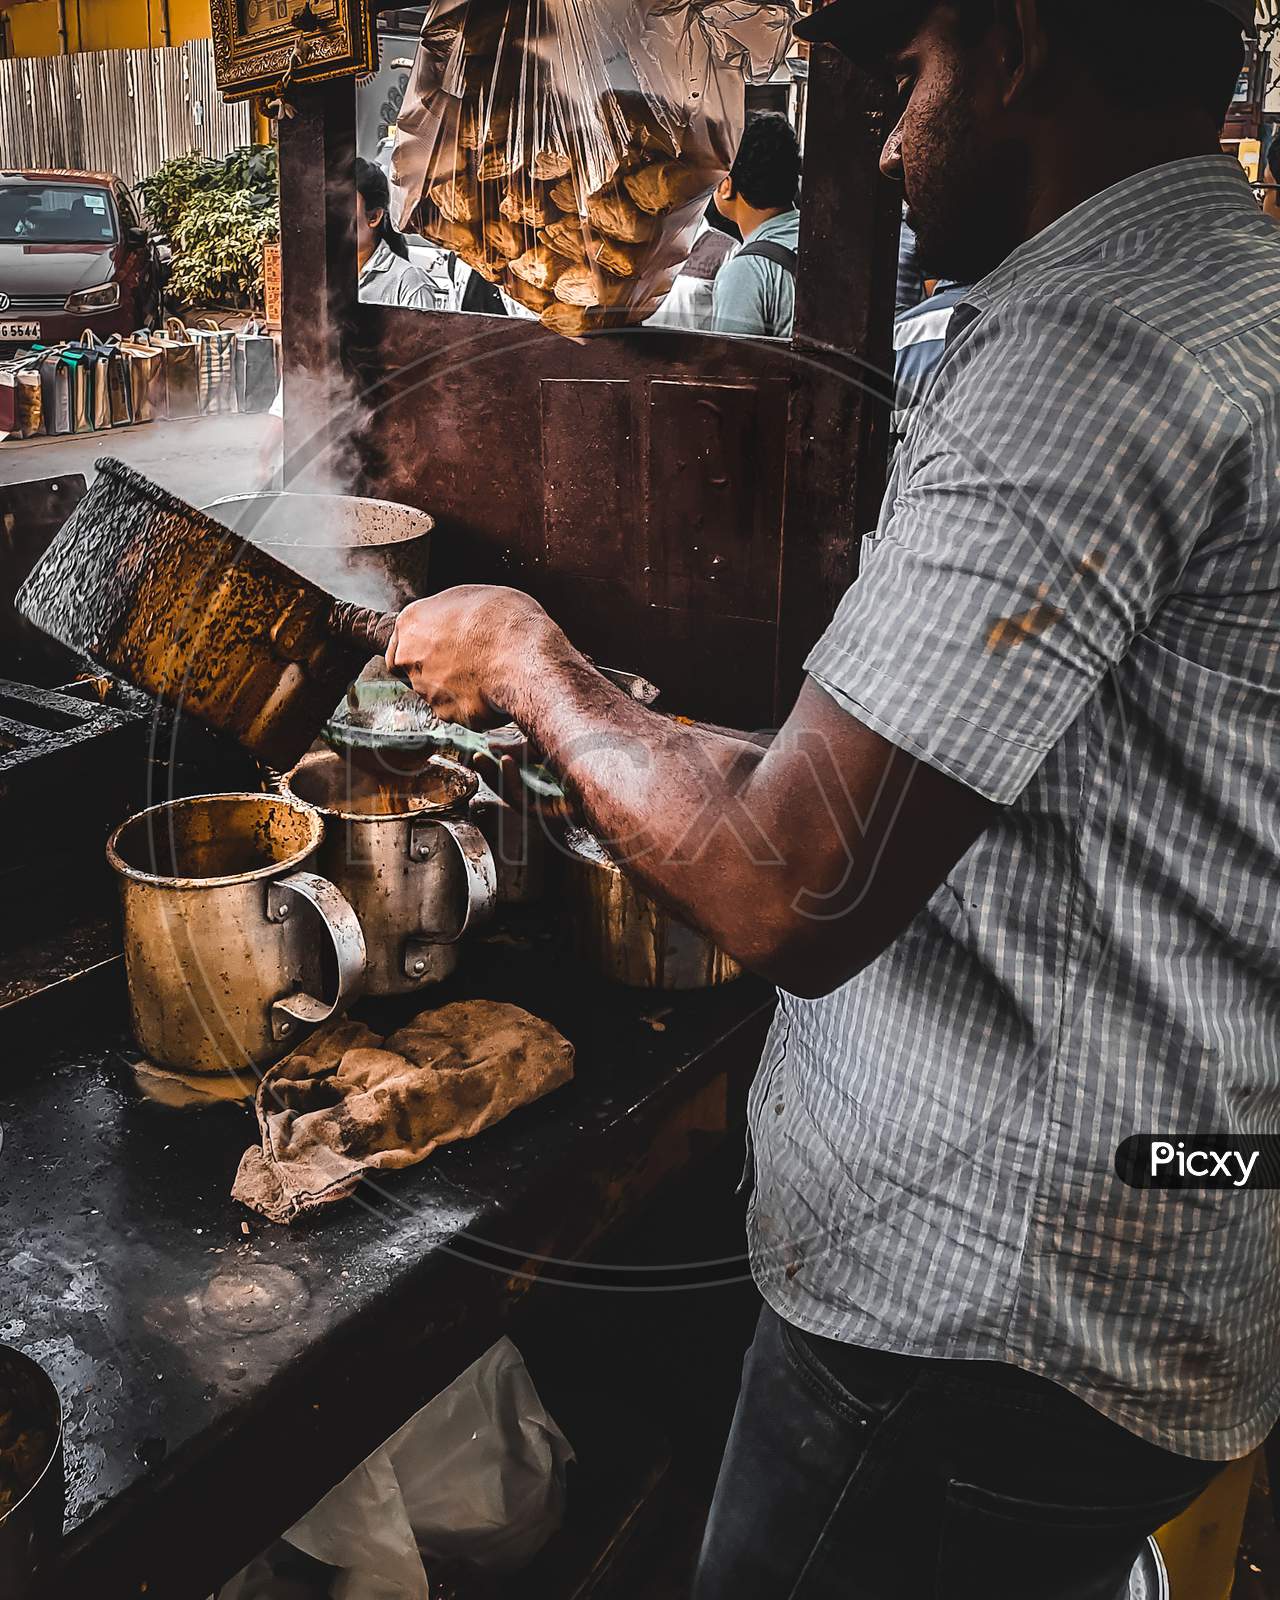 Along the streets of Kolkata, fueling up in a cup of Chai!